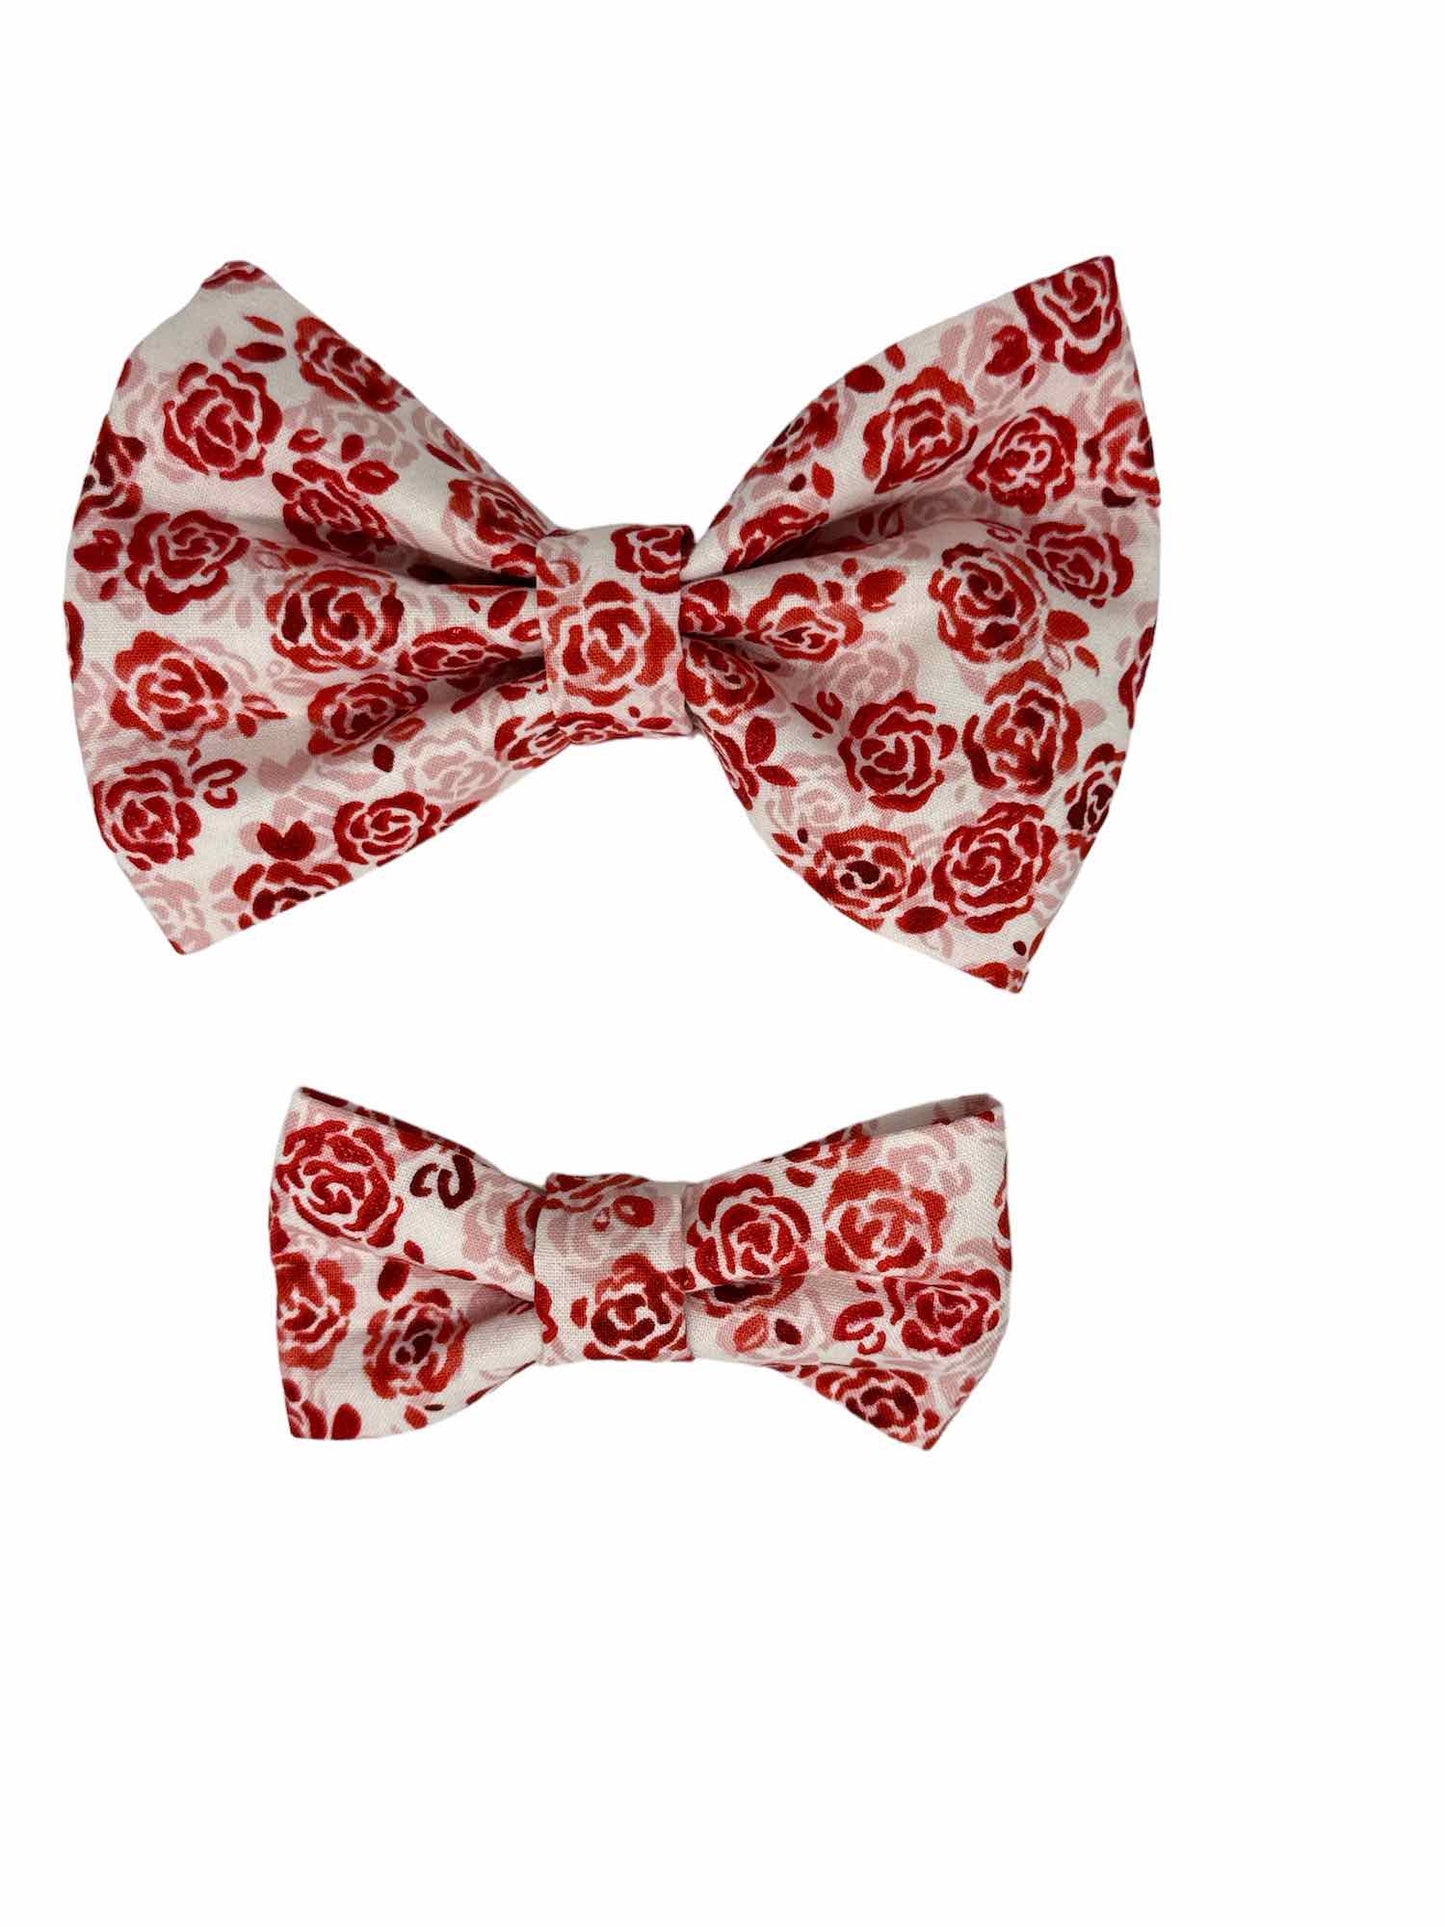 Sparkle Red Rose Calico Dog Bow Tie